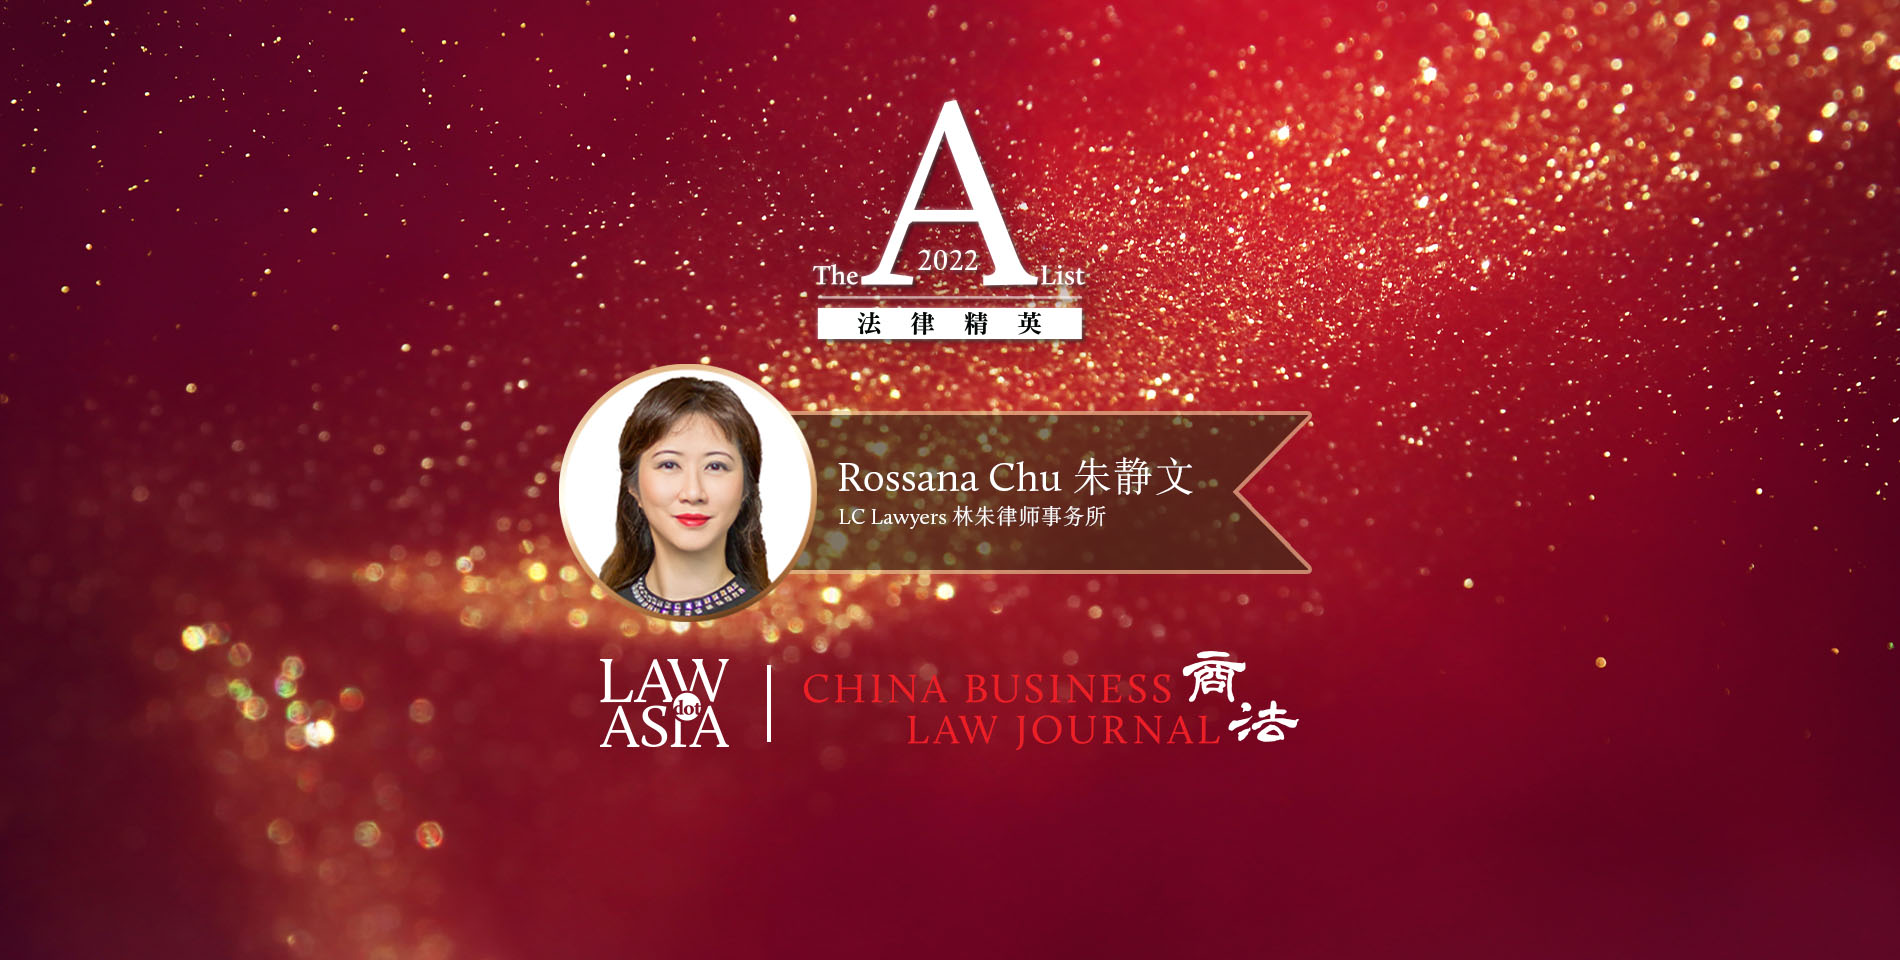 Rossana Chu is ranked in the “A-List 2022” by China Business Law Journal